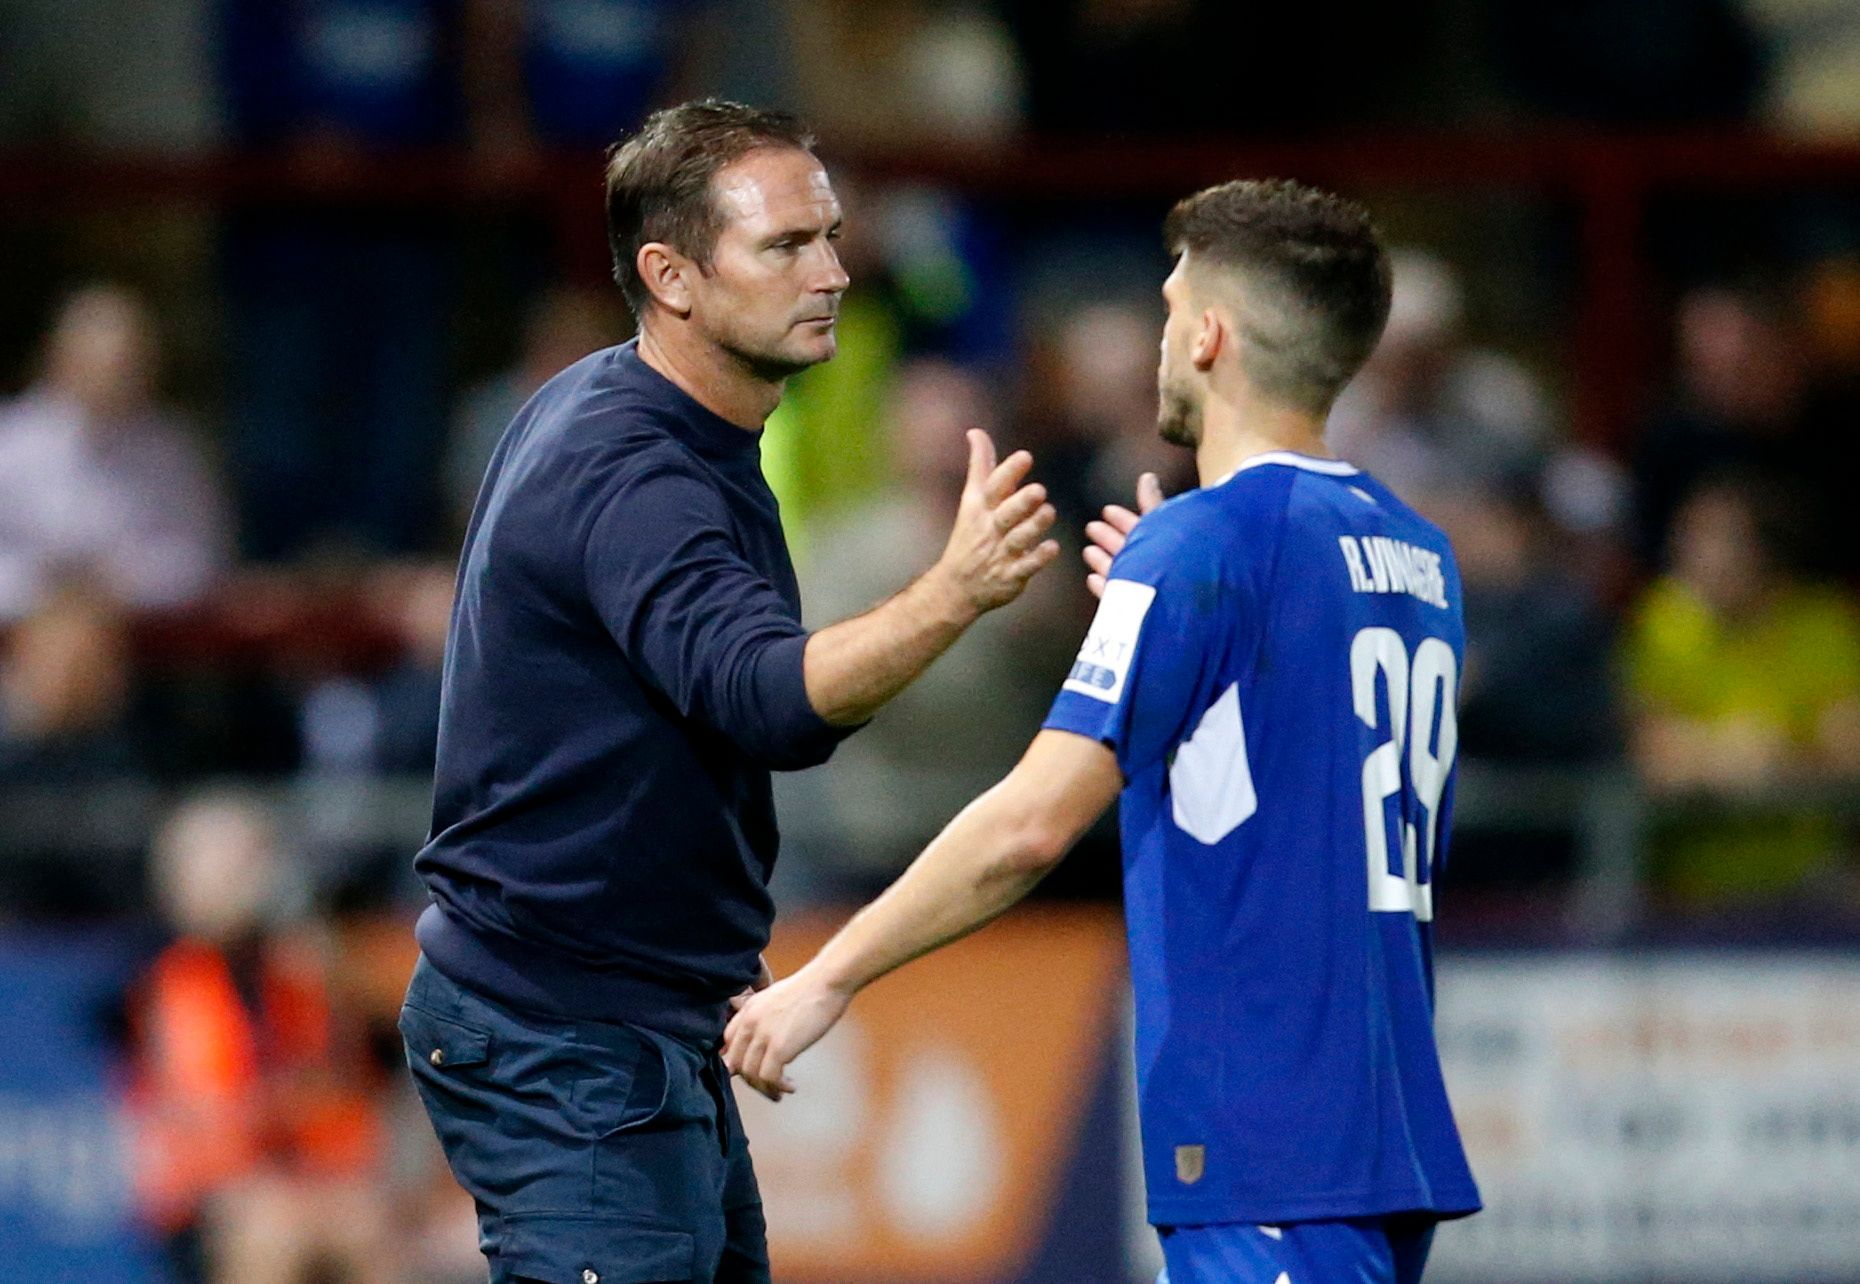 Soccer Football - Carabao Cup Second Round - Fleetwood Town v Everton - Highbury Stadium, Fleetwood, Britain - August 23, 2022 Everton manager Frank Lampard shakes hands with Ruben Vinagre after the match Action Images via Reuters/Ed Sykes EDITORIAL USE ONLY. No use with unauthorized audio, video, data, fixture lists, club/league logos or 'live' services. Online in-match use limited to 75 images, no video emulation. No use in betting, games or single club /league/player publications.  Please con